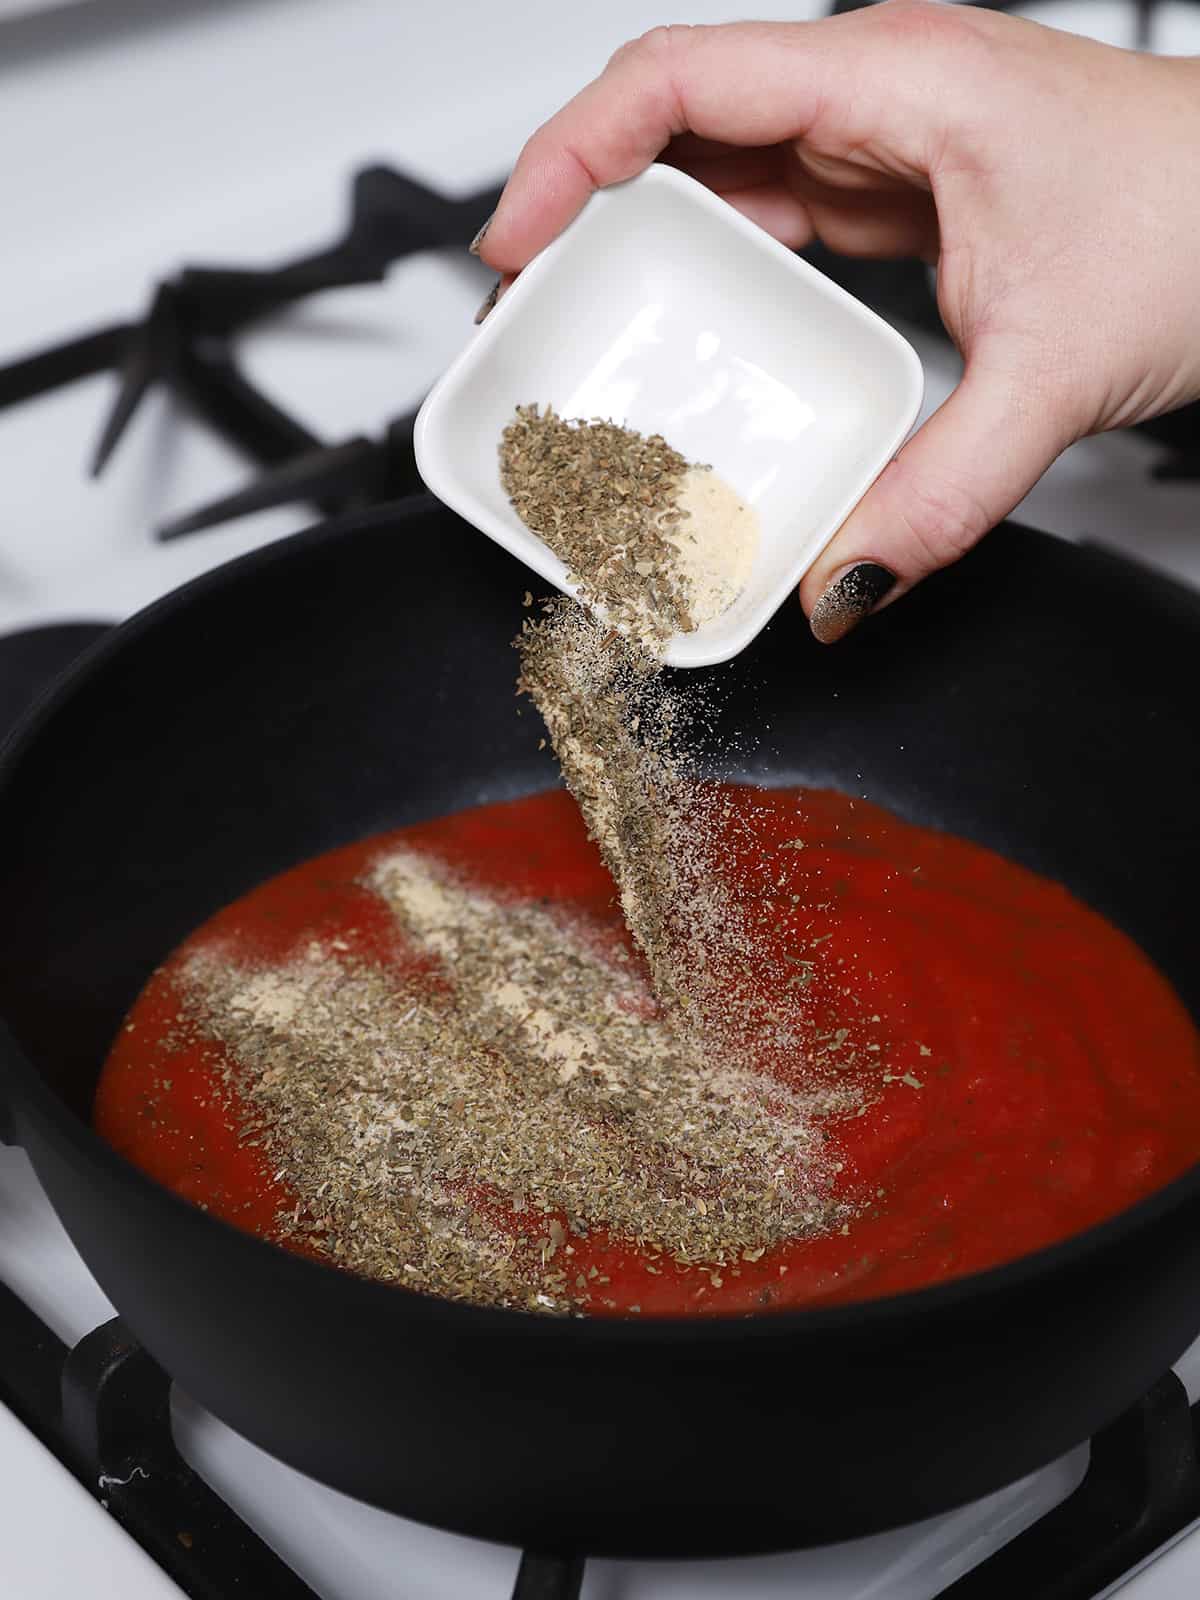 Spices being sprinkled into a pan of tomato sauce.